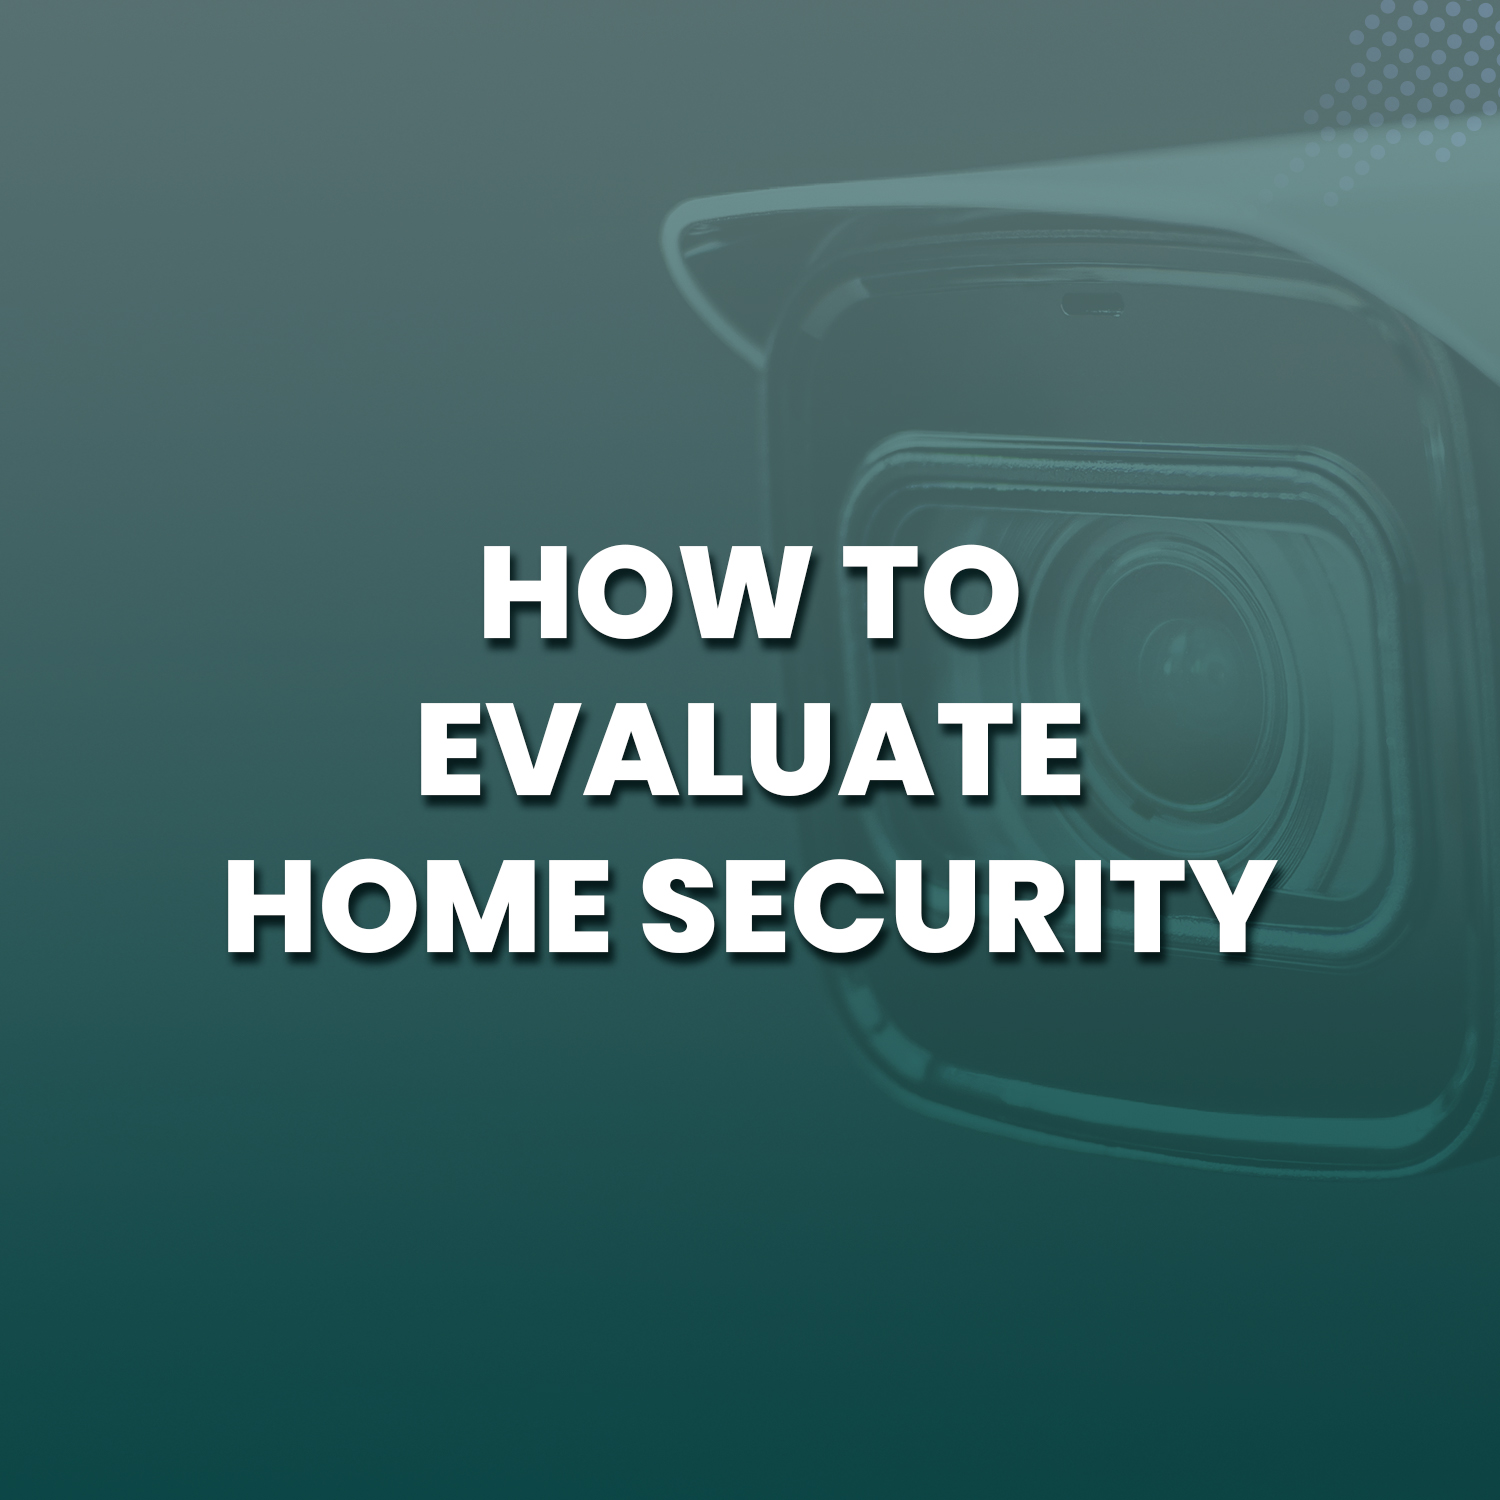 How To Evaluate Home Security